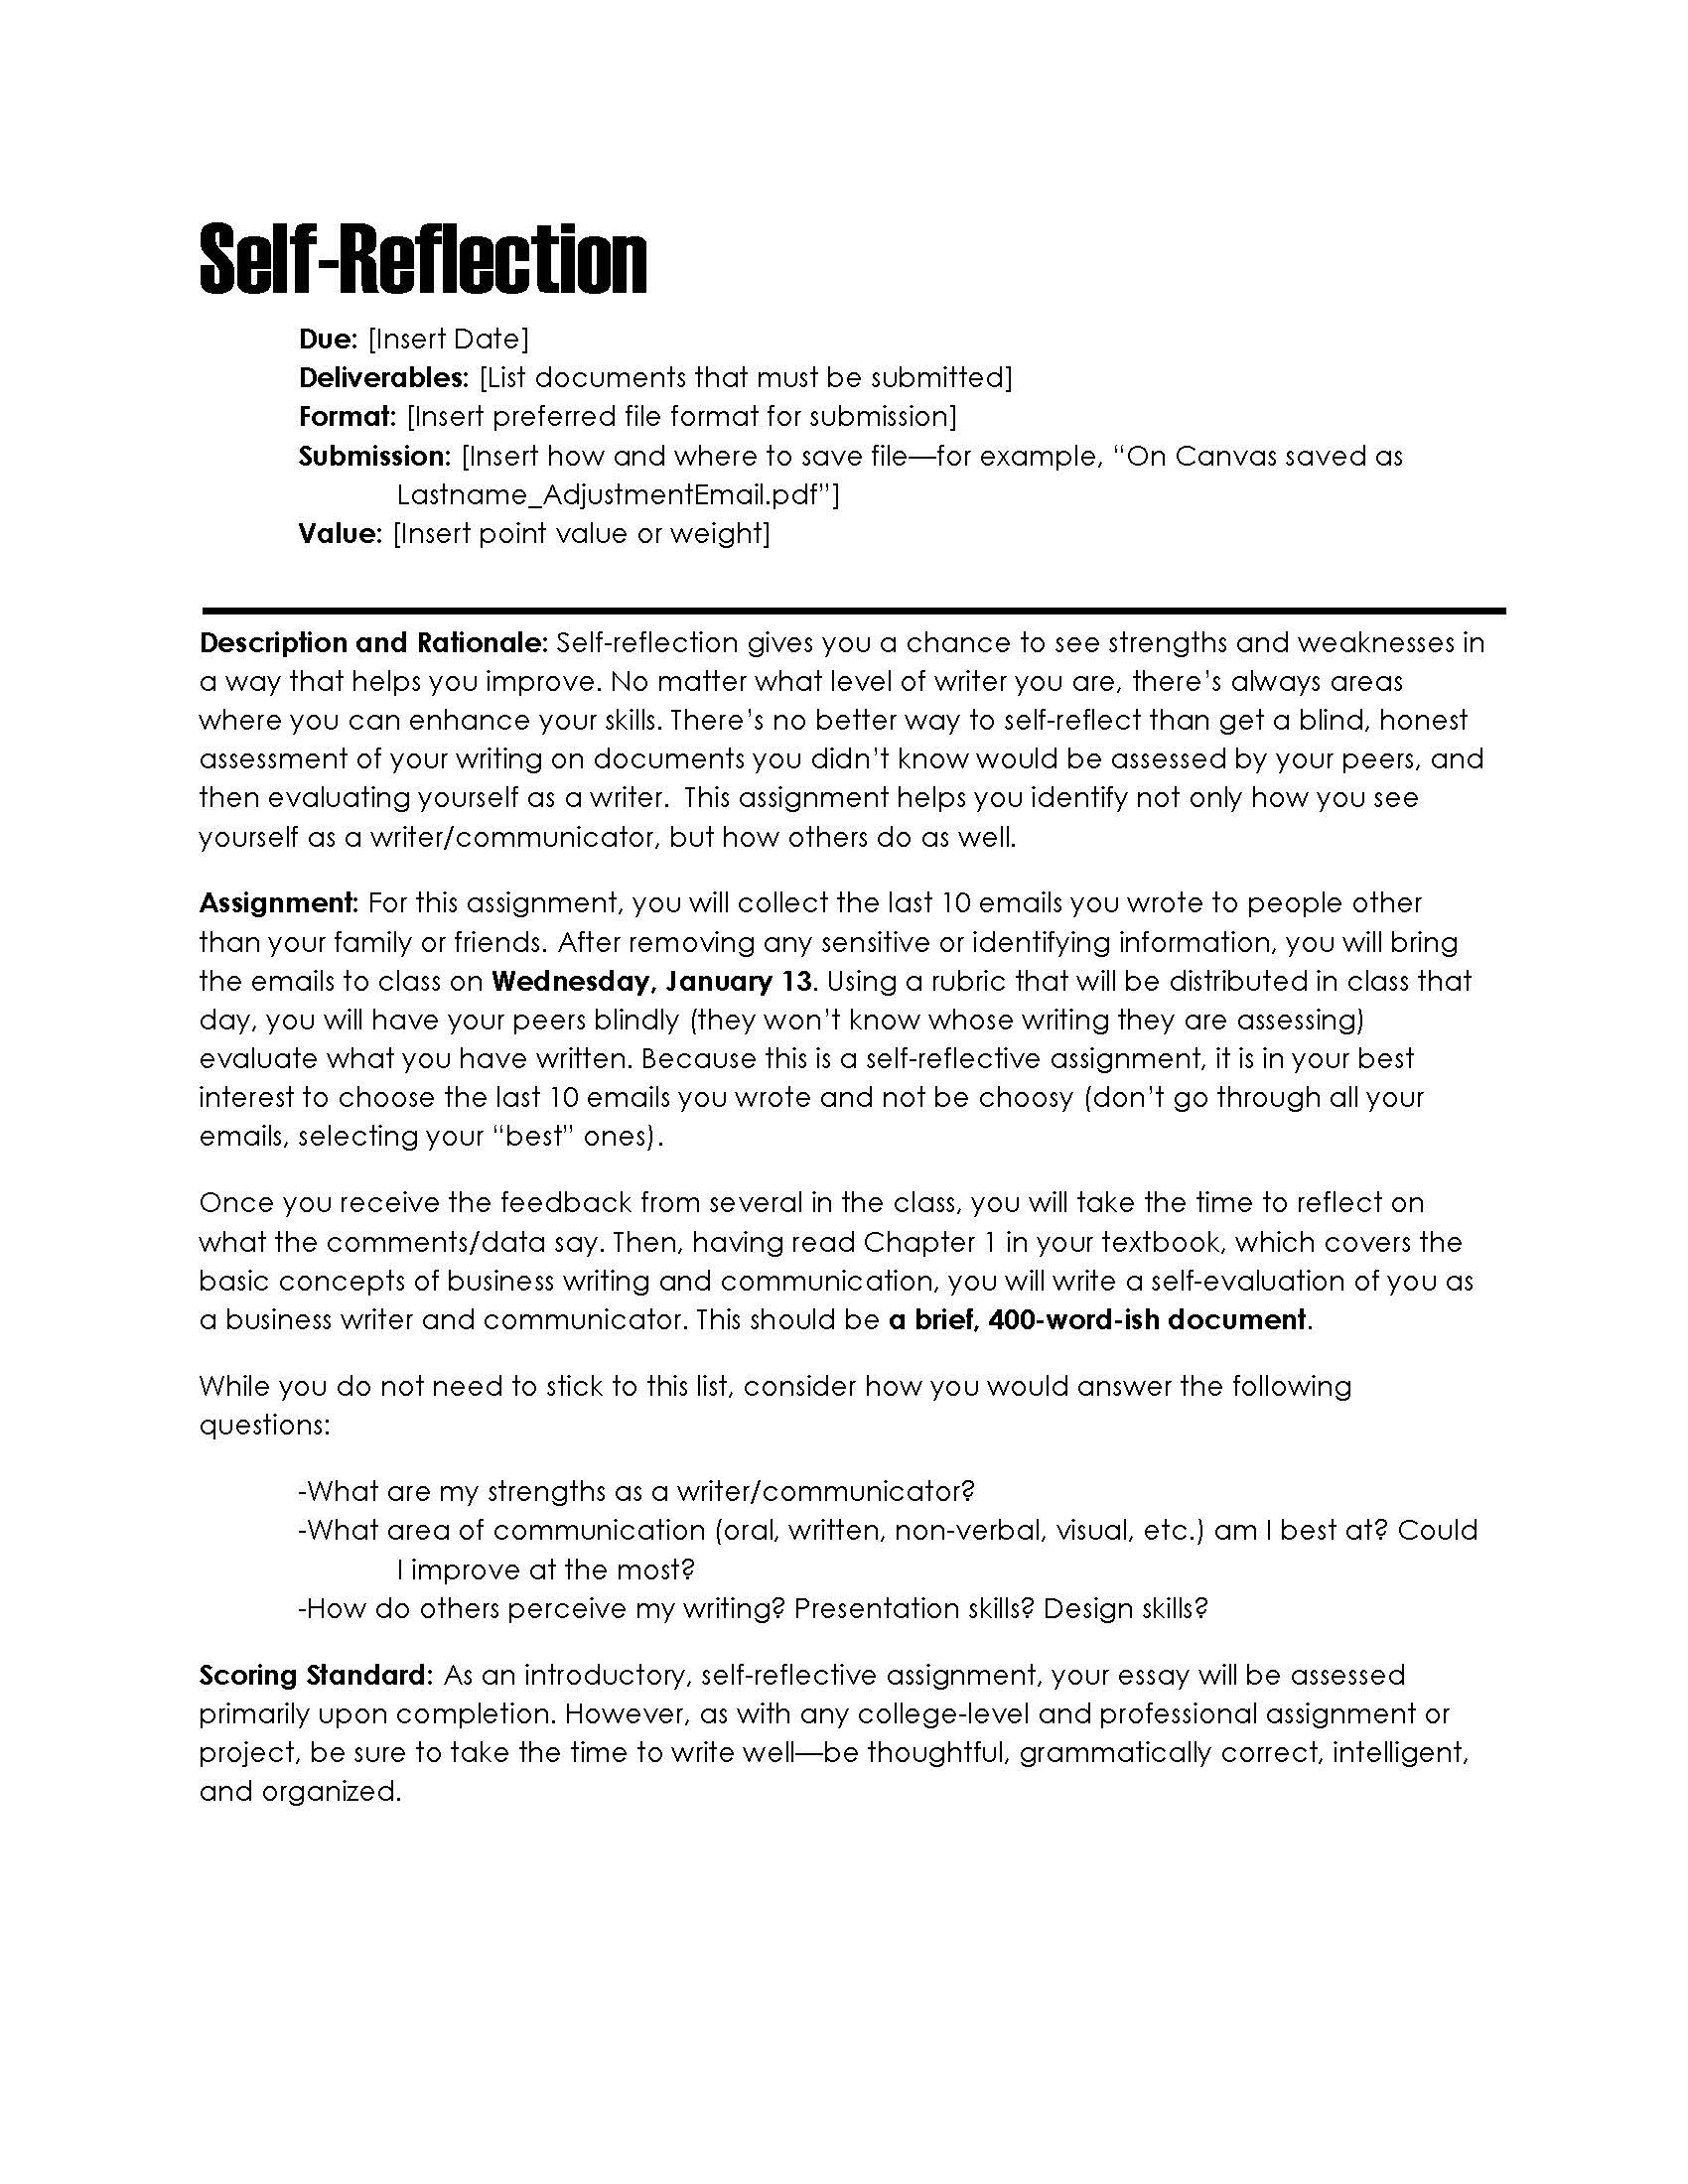 reflection paper sample introduction